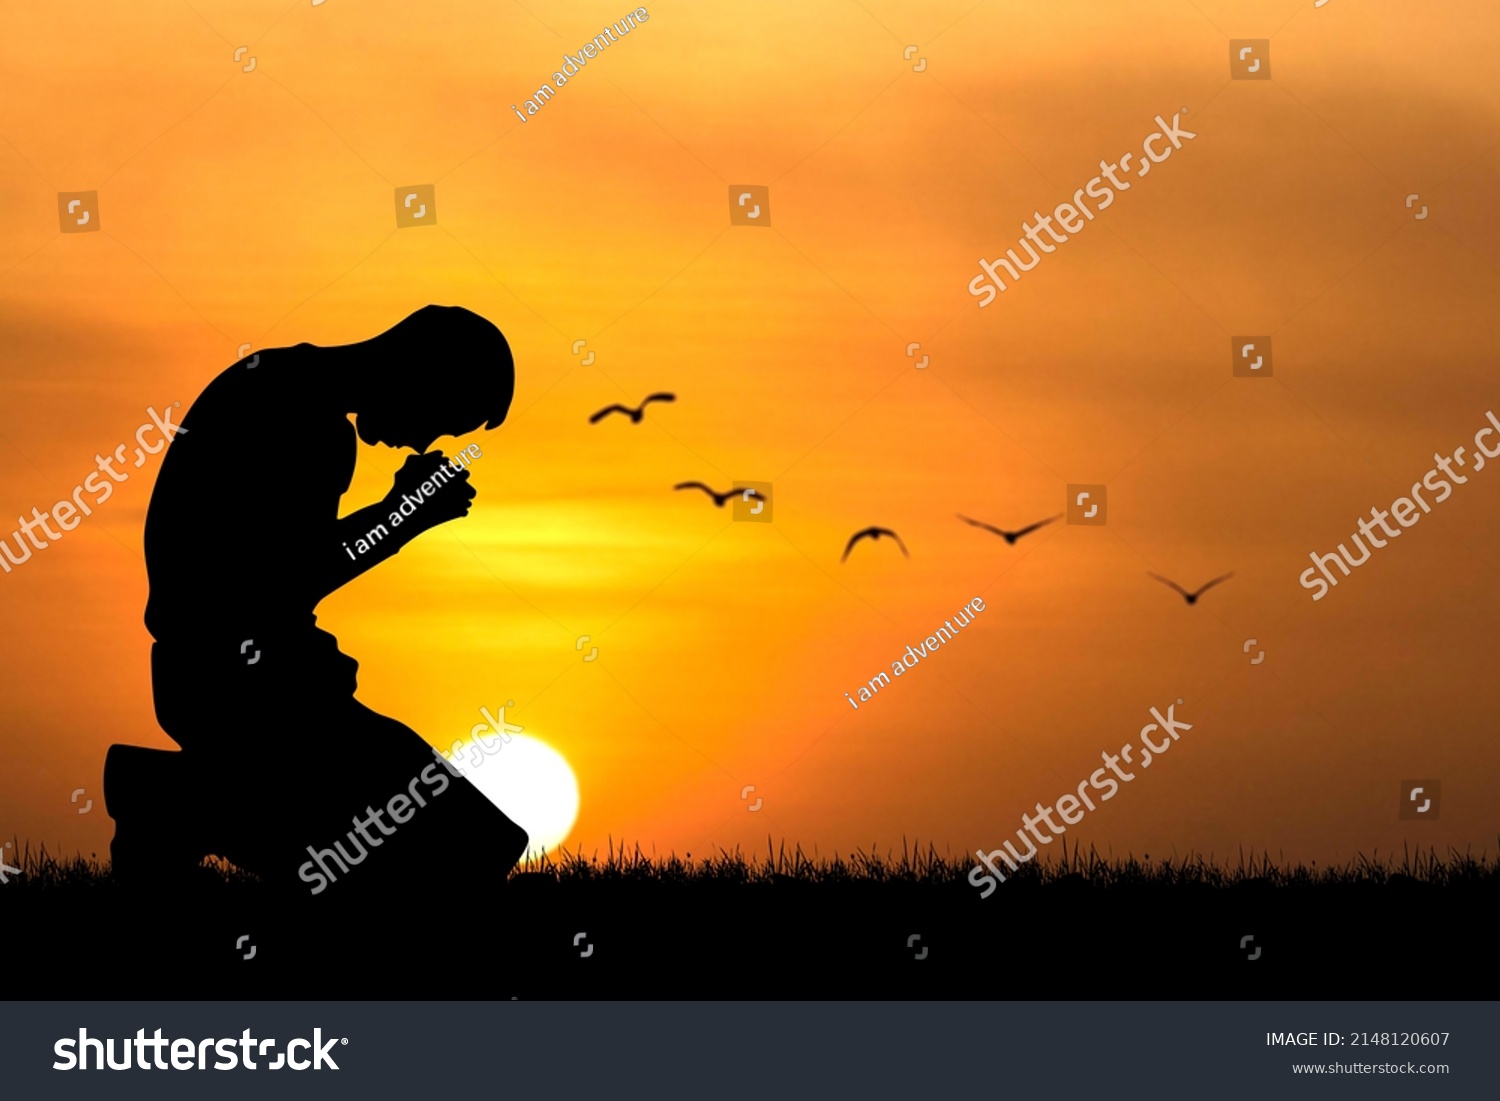 Silhouette of Christian Praying Hands Spiritual and Religious People Praying to God Christianity Concepts #2148120607